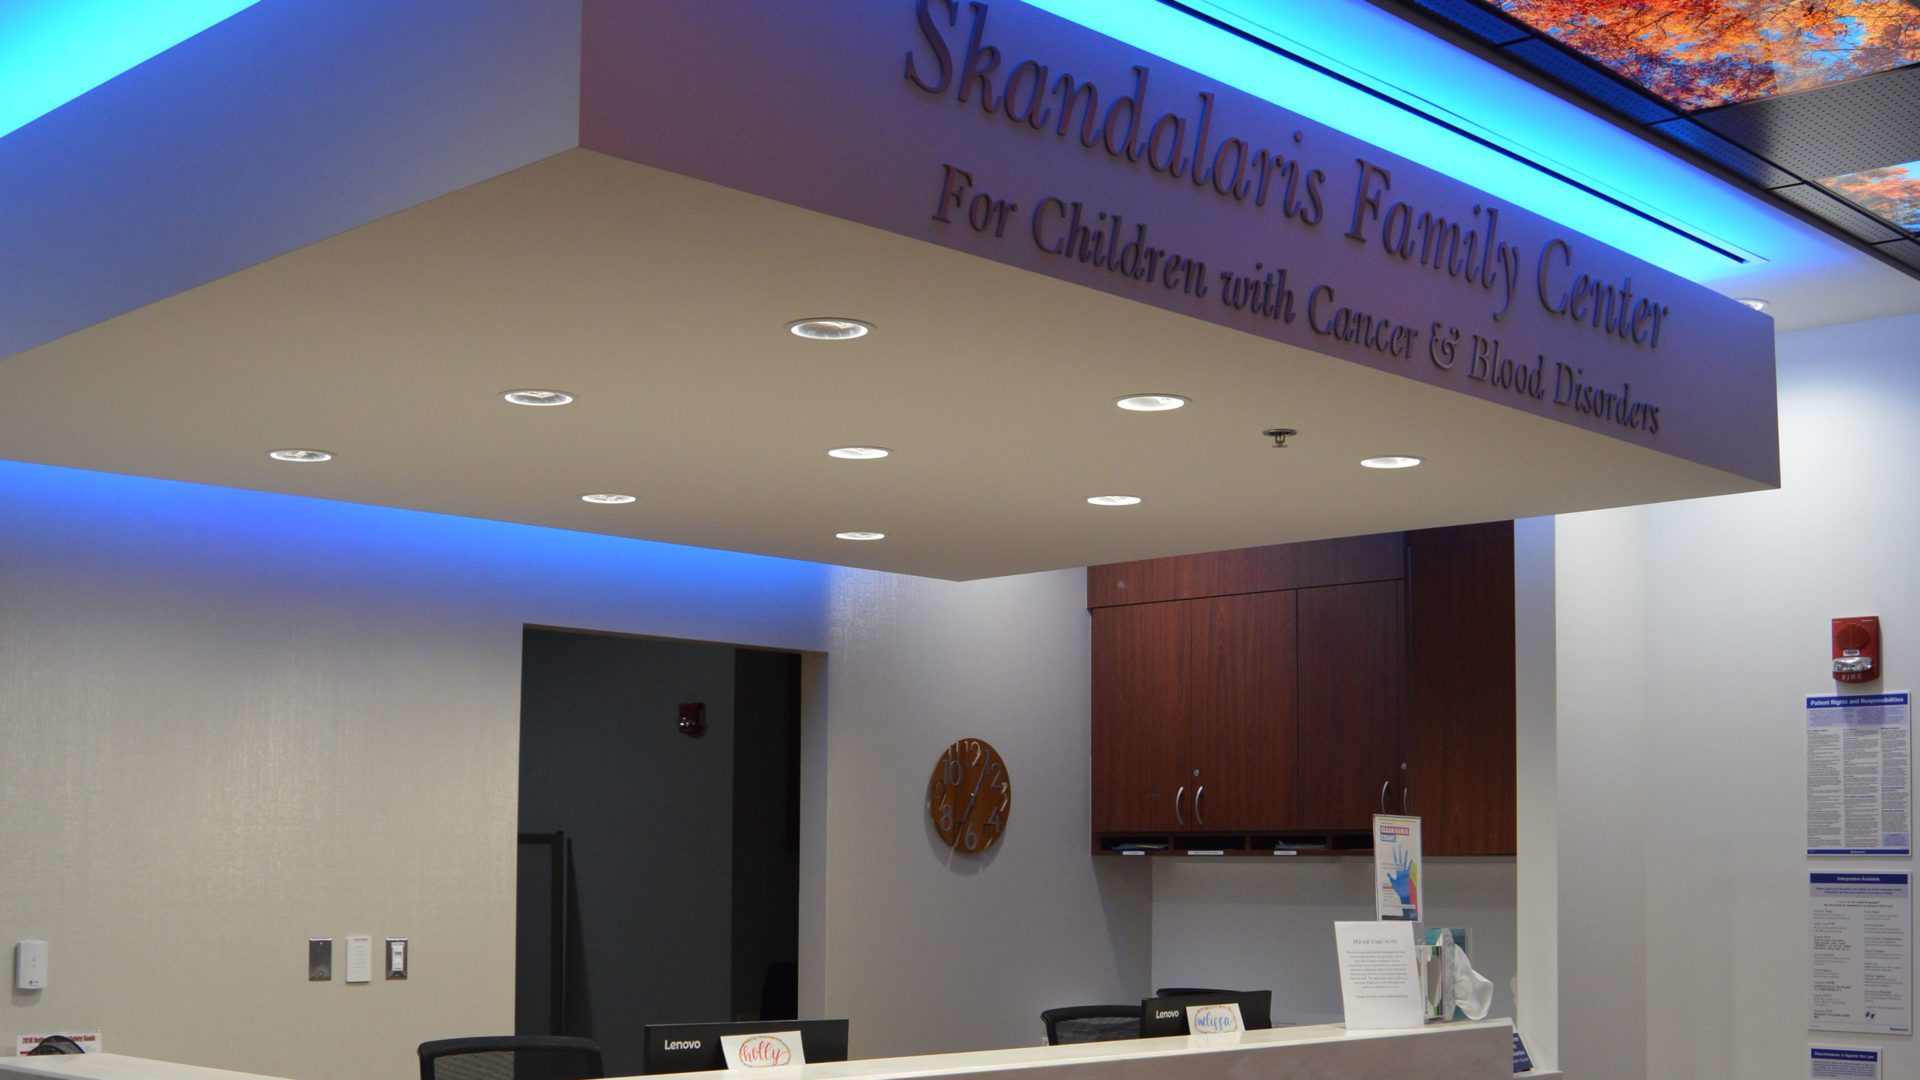 image of Center For Children With Cancer and Blood Disorders Reception area. sign reads "skandalaris family center"